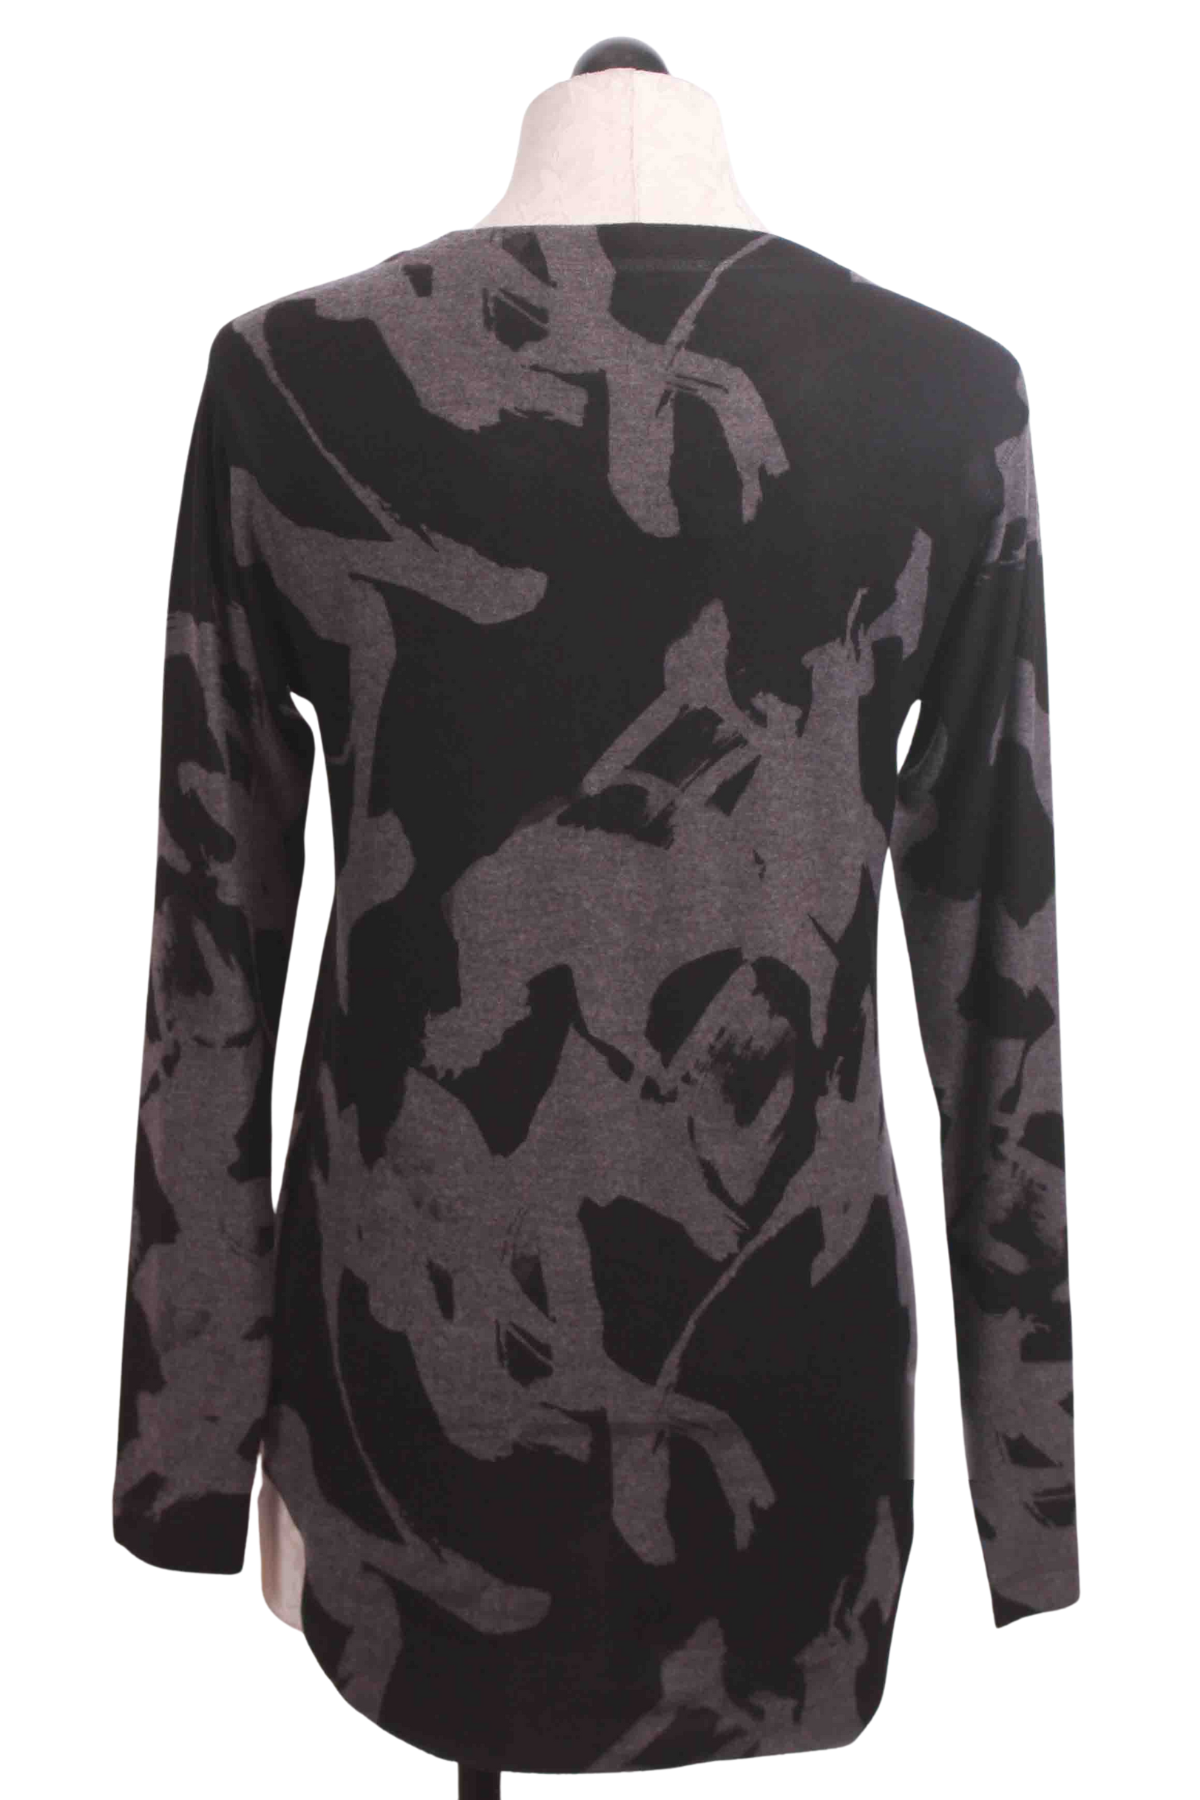 back view of Black and Grey Curved Bottom Abstract Print Top by Nally and Millie